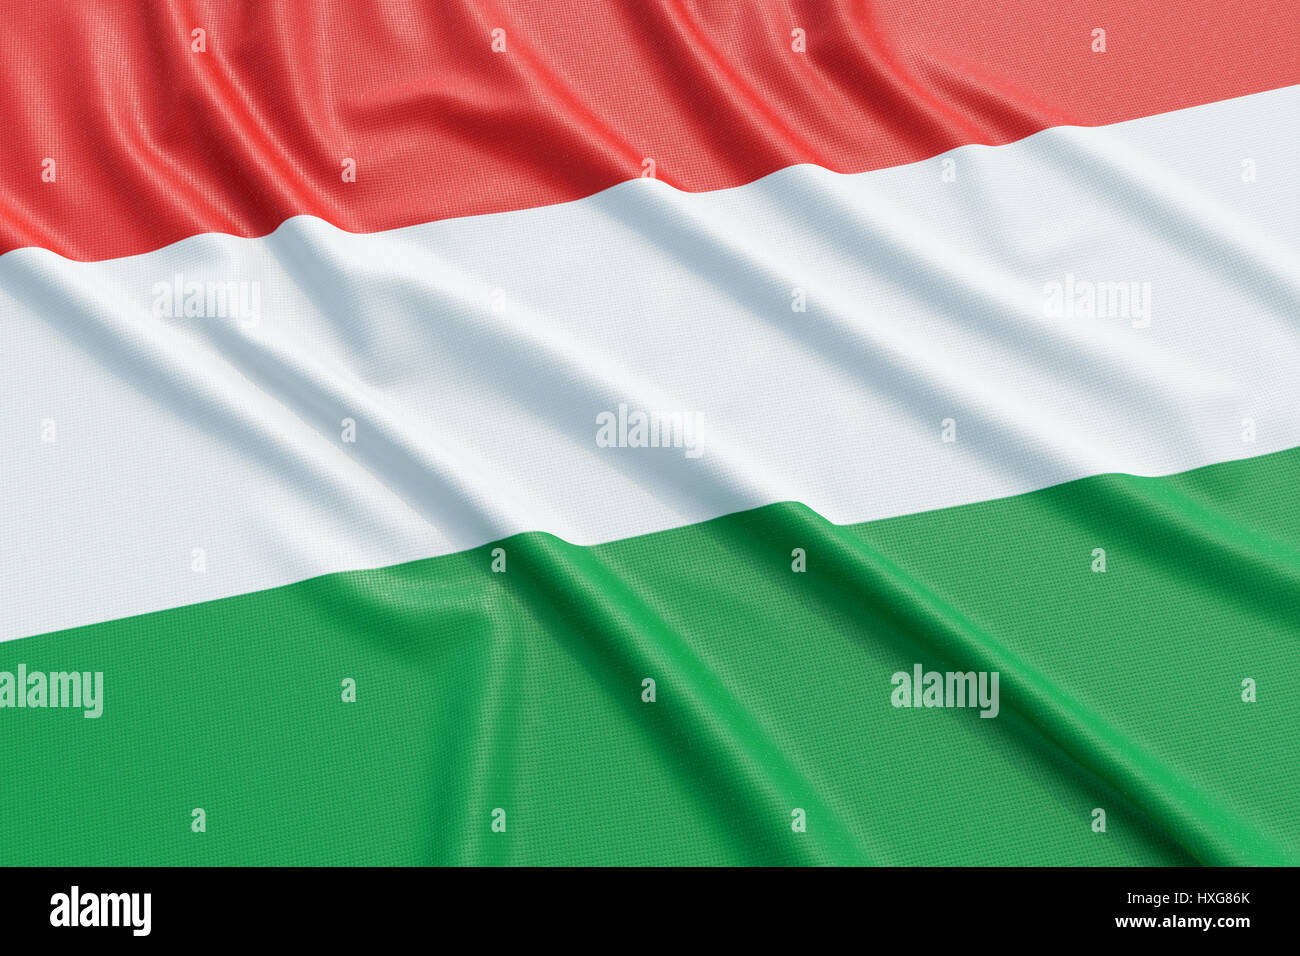 Hungary flag. Wavy fabric high detailed texture. 3d illustration rendering Stock Photo